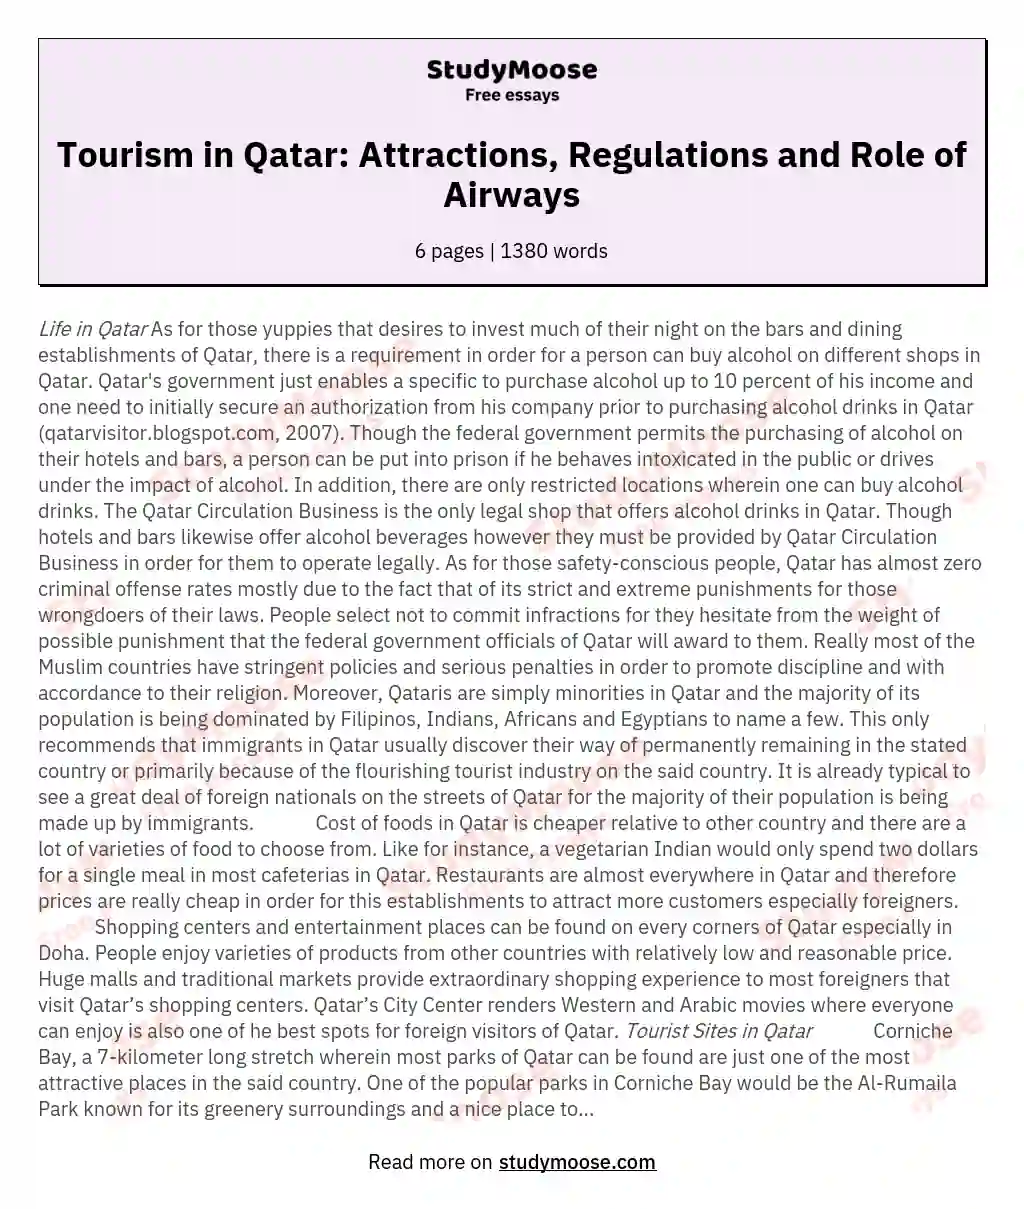 Tourism in Qatar: Attractions, Regulations and Role of Airways essay